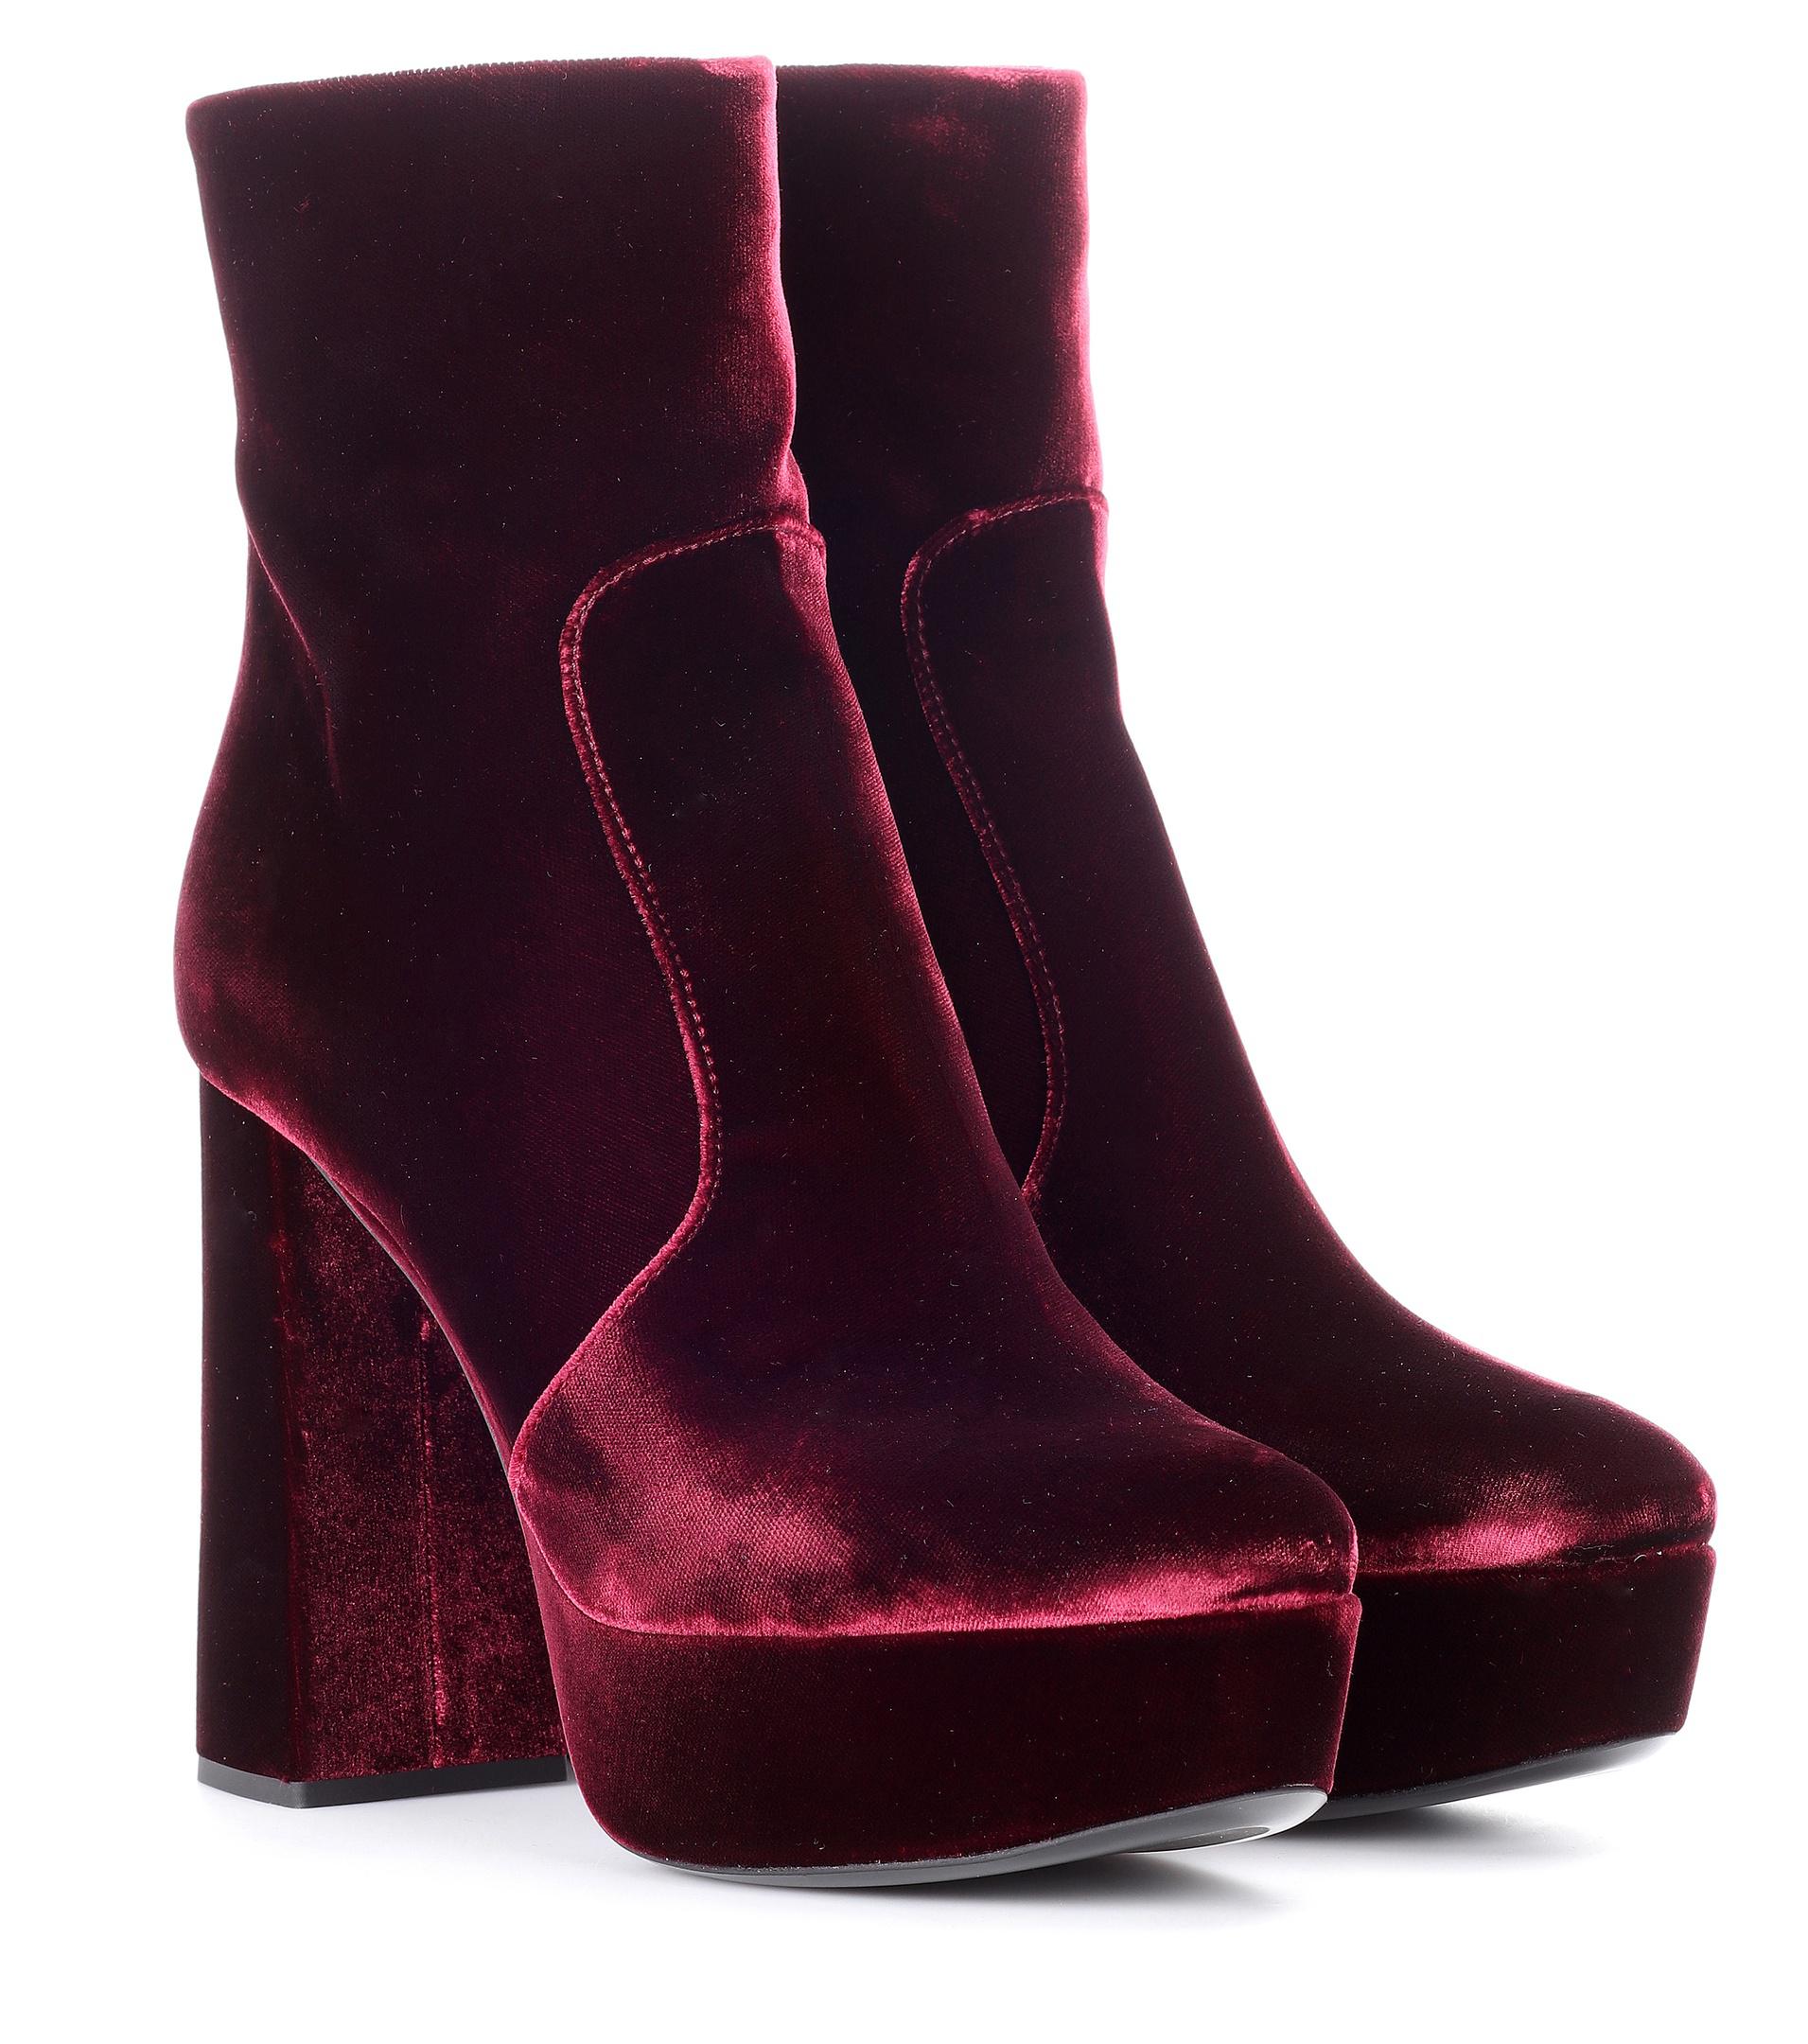 Lyst - Prada Velvet Plateau Ankle Boots in Red